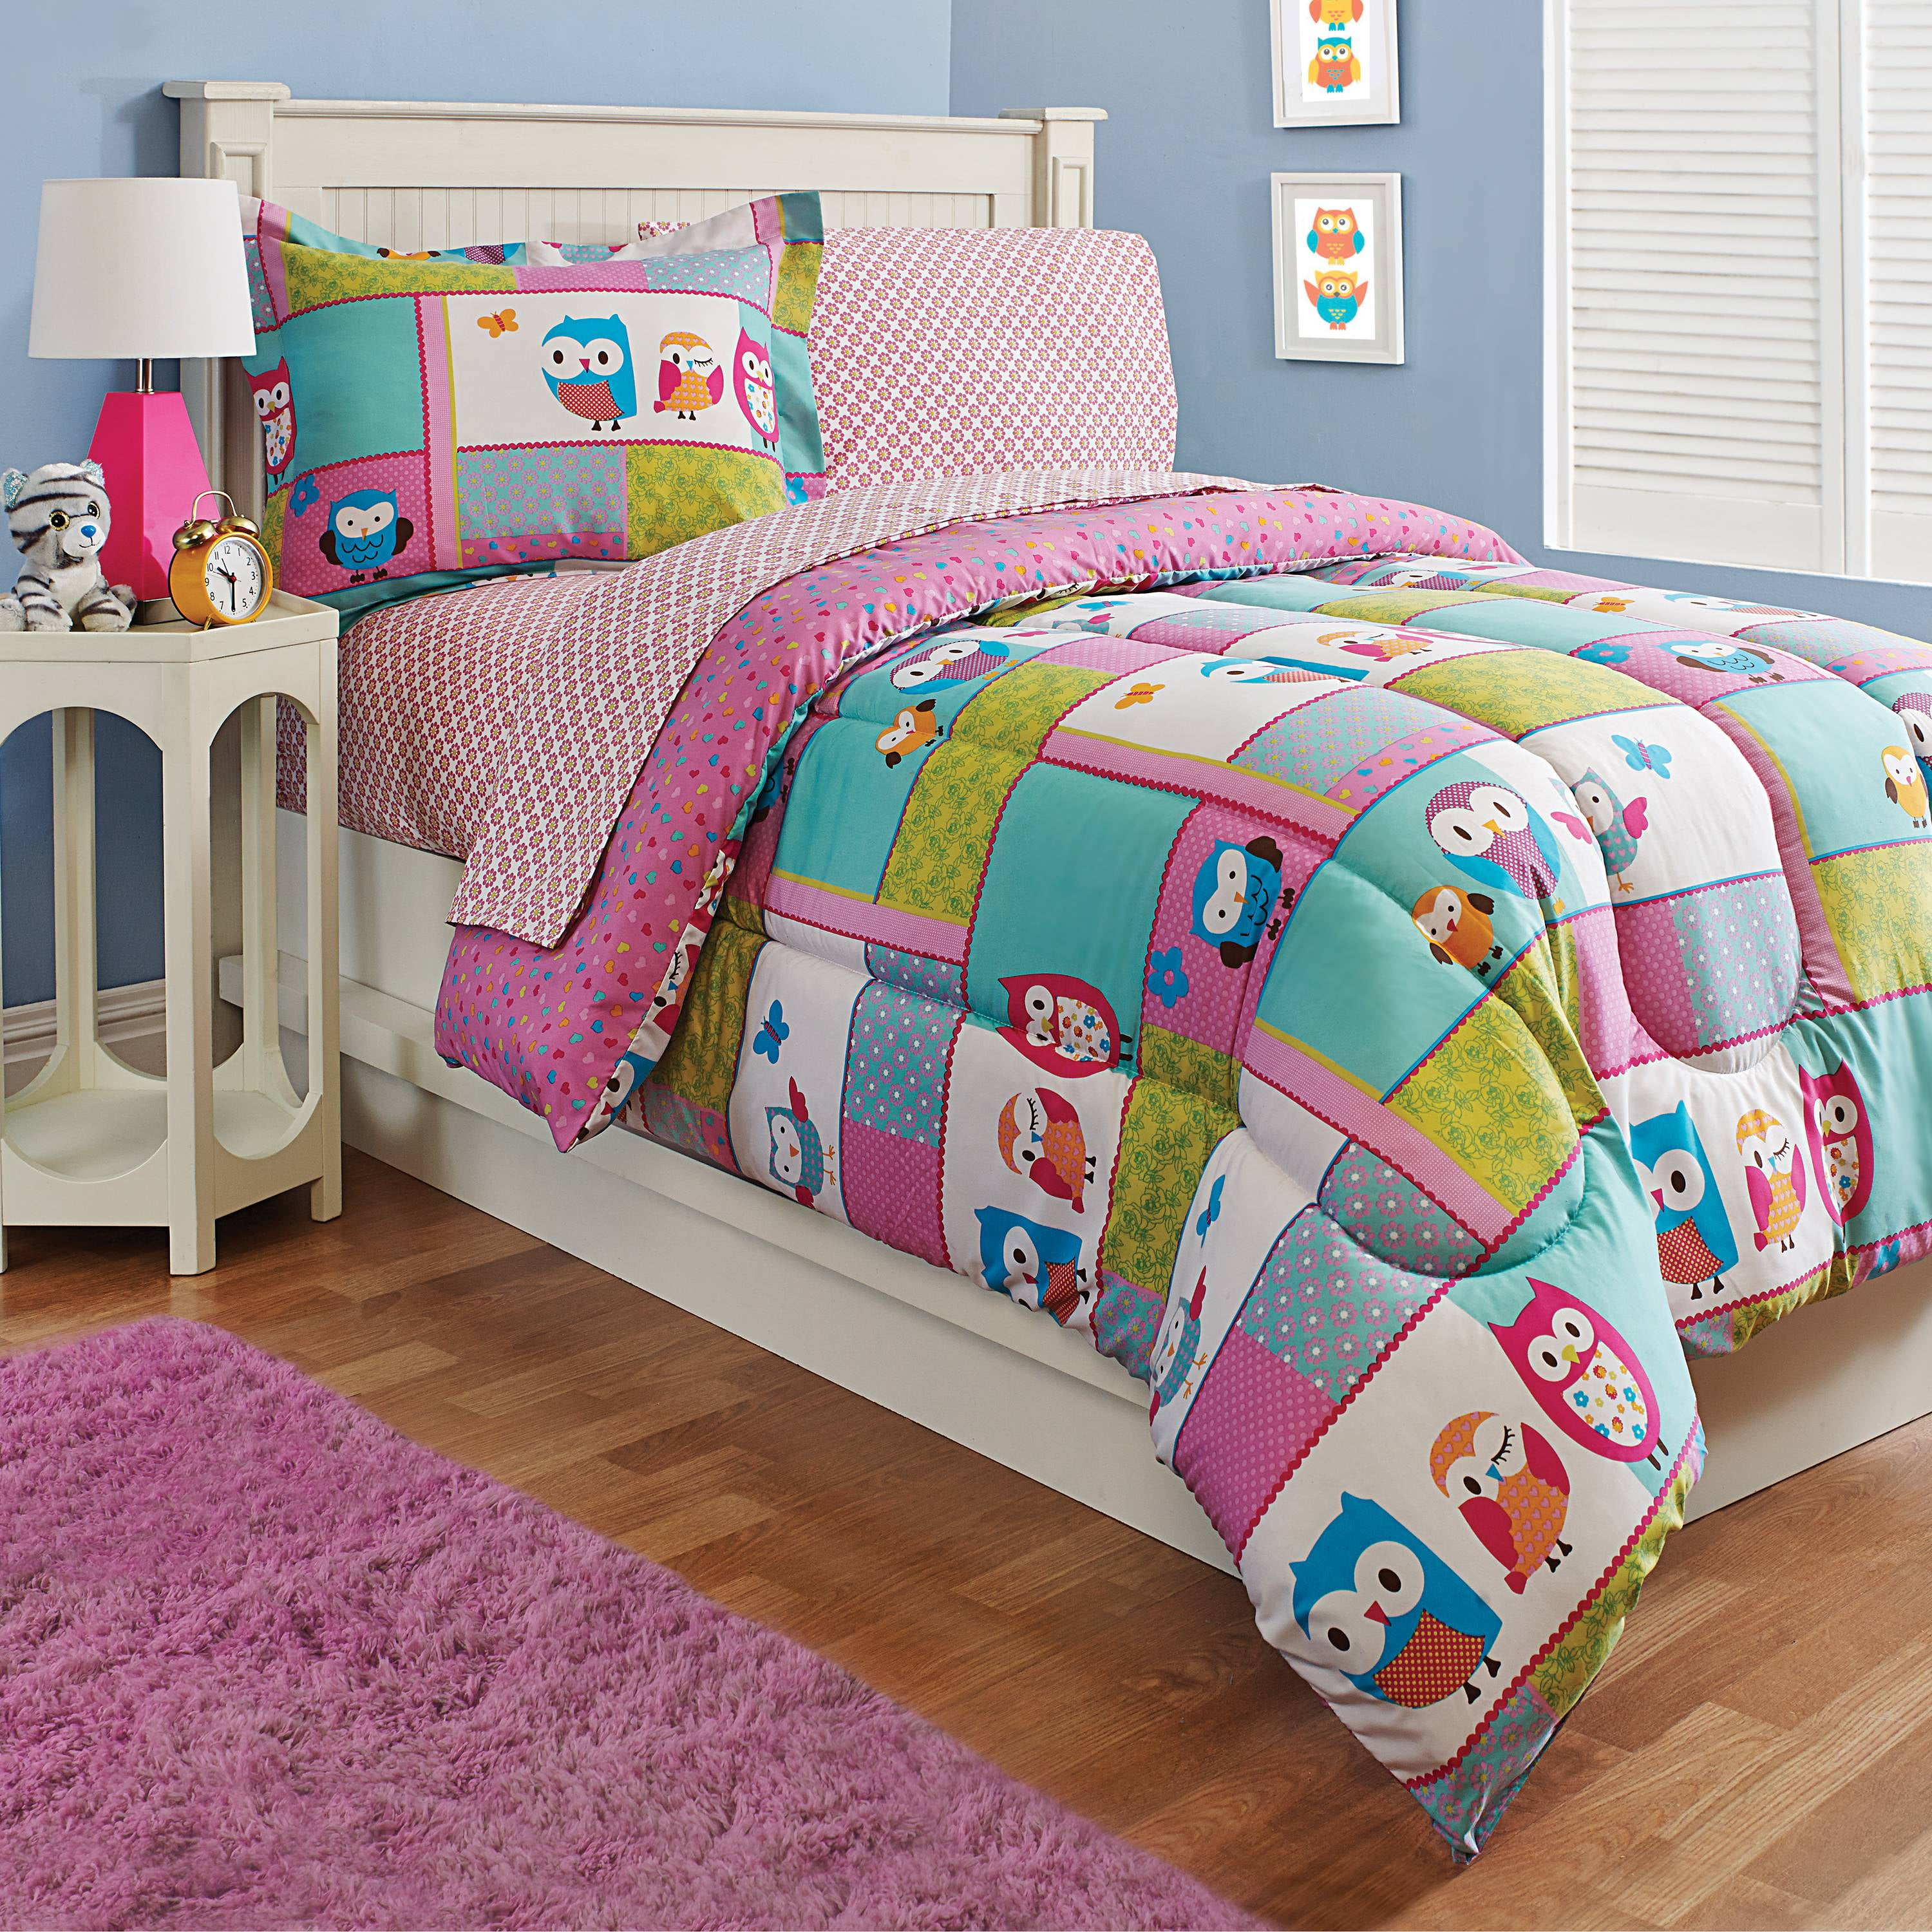 Twin Better Home Style Multicolor Patchwork Pink Green Blue Owls Birds Floral Hearts Butterflies Fun Design 5 Piece Comforter Bedding Set for Girls/Kids Bed in a Bag with Sheet Set # Patchwork Owl